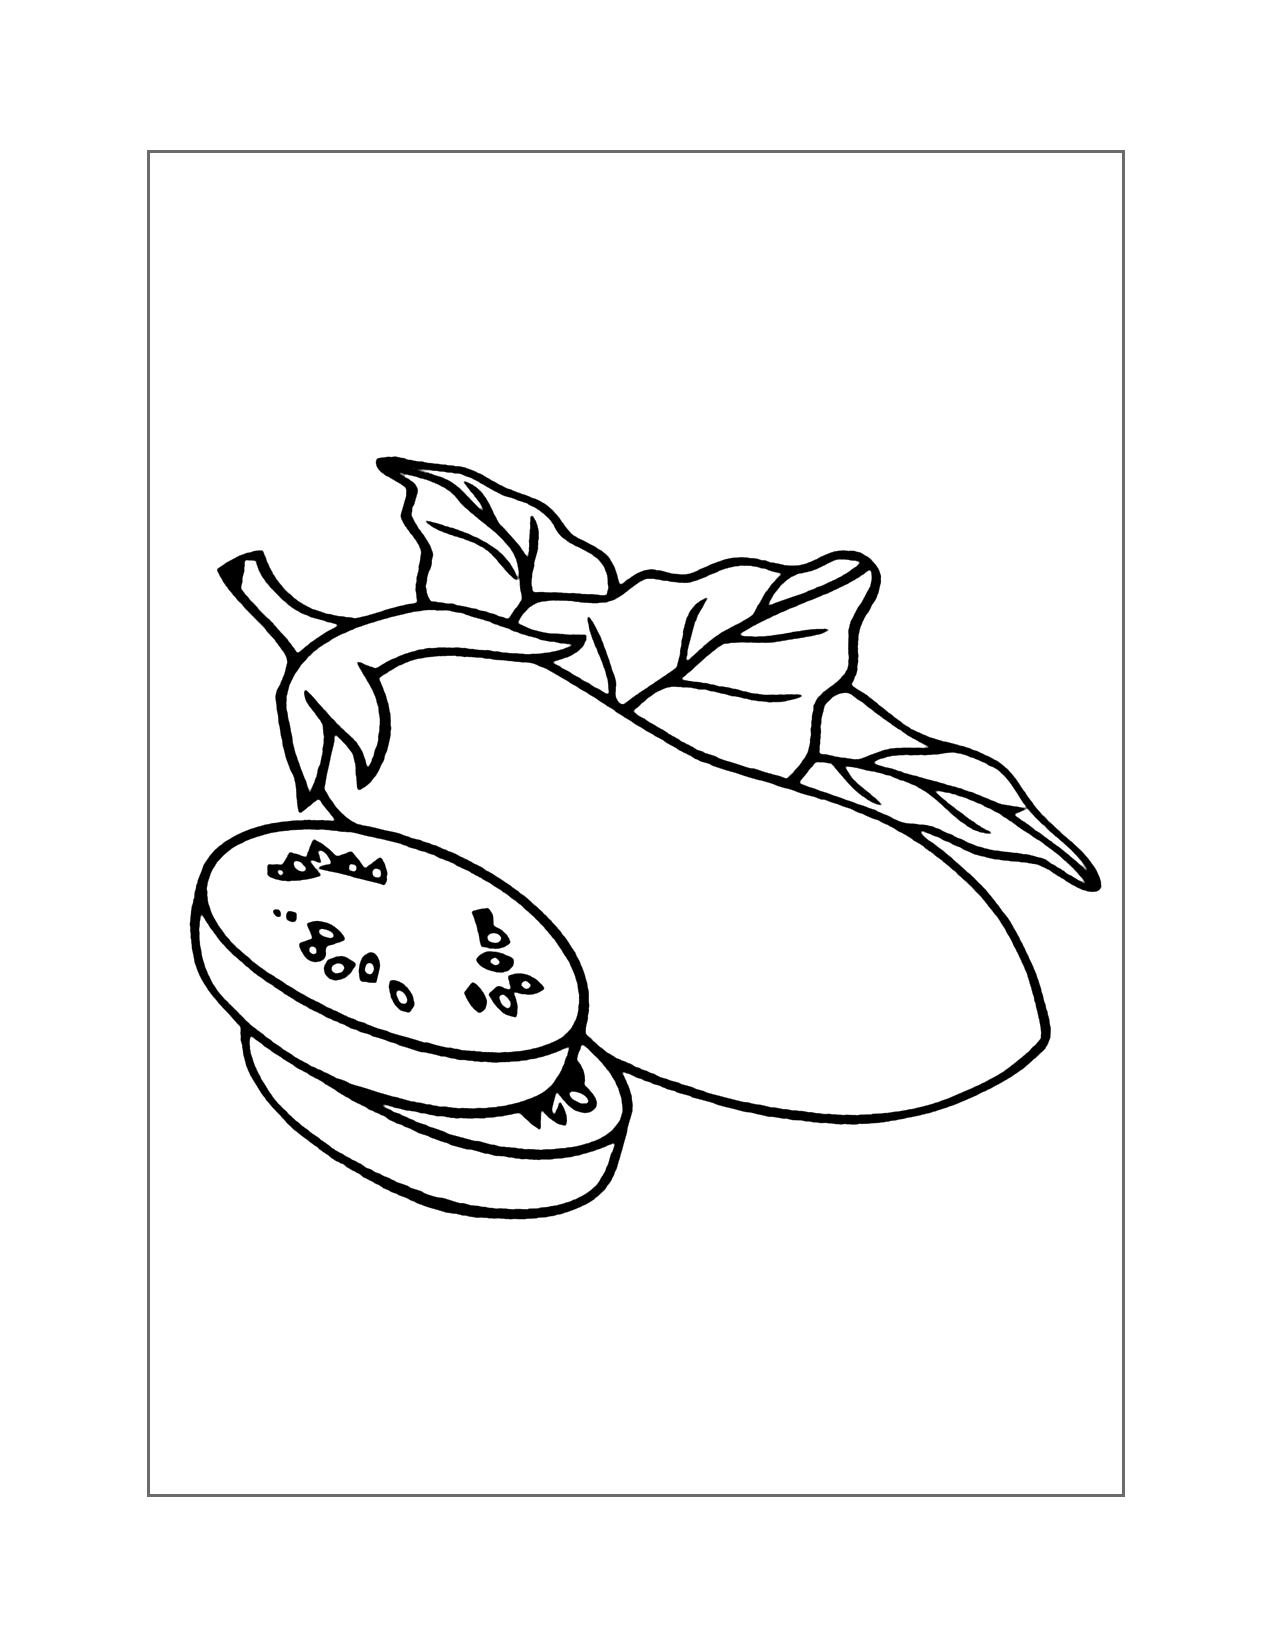 Sliced Eggplant Coloring Page